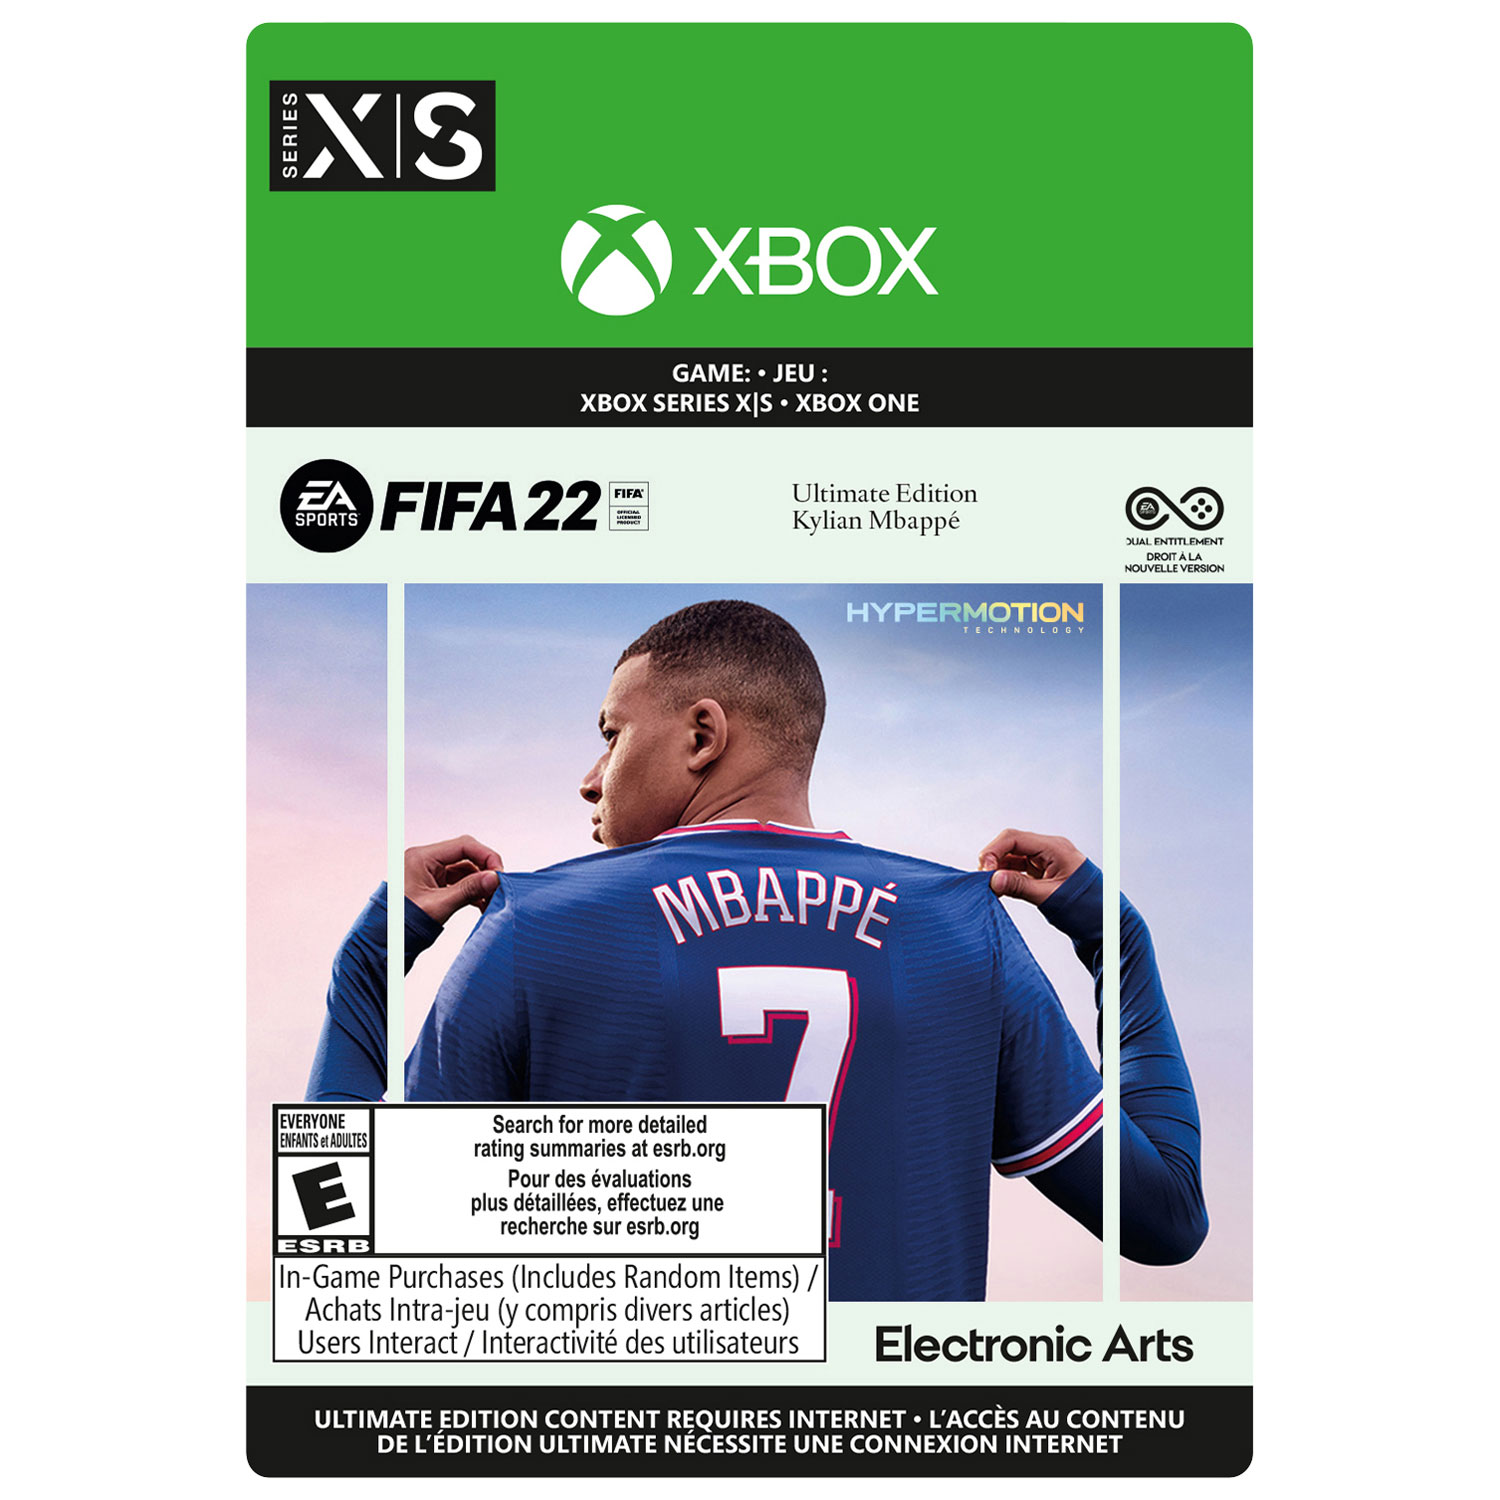 FIFA 22 Ultimate Edition (Xbox Series X|S / Xbox One) - Digital Download